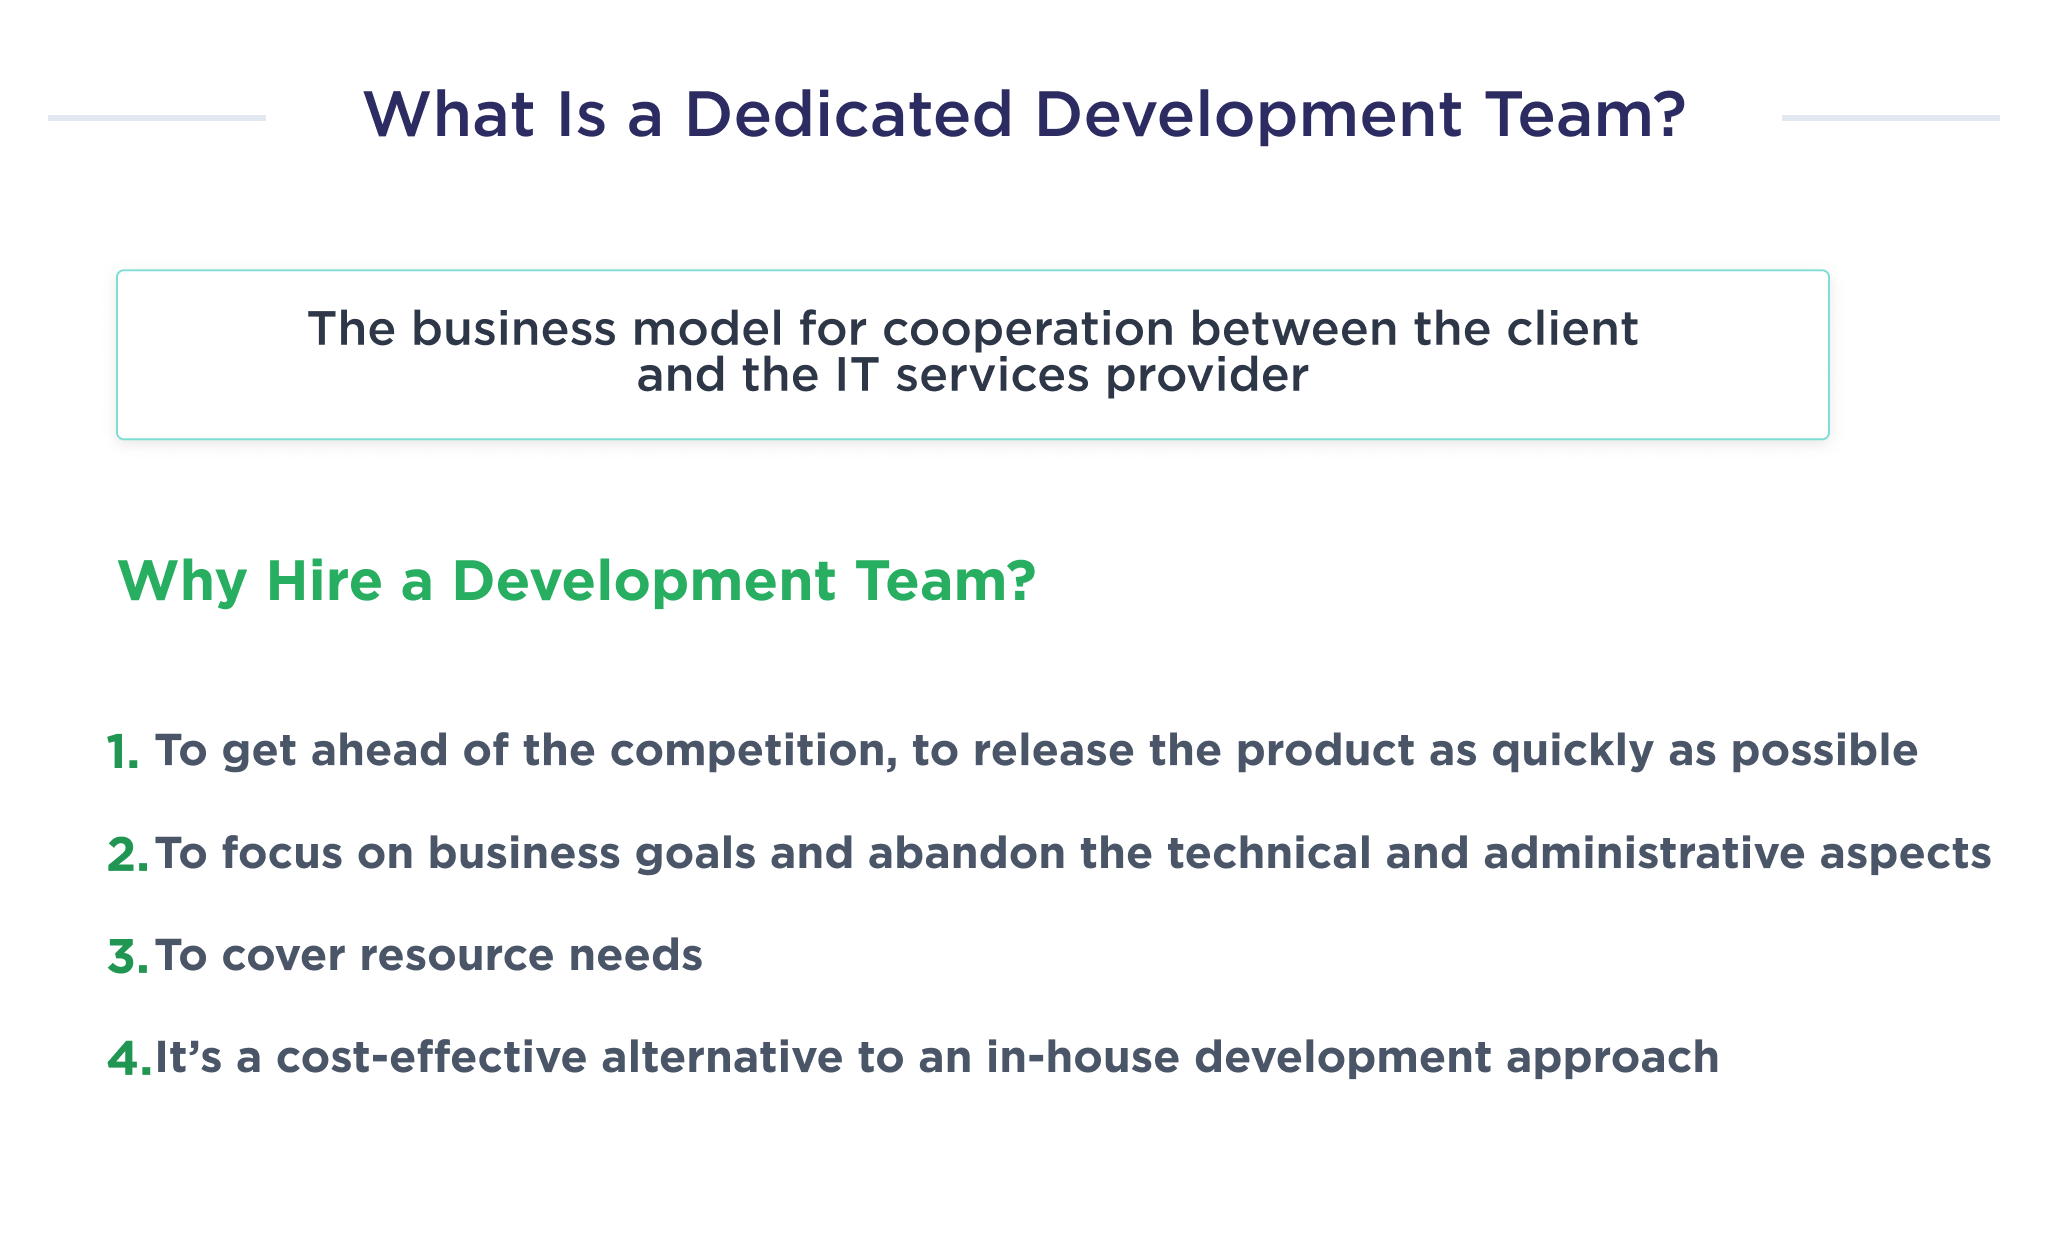 The illustration shows an explanation of what a dedicated development team is